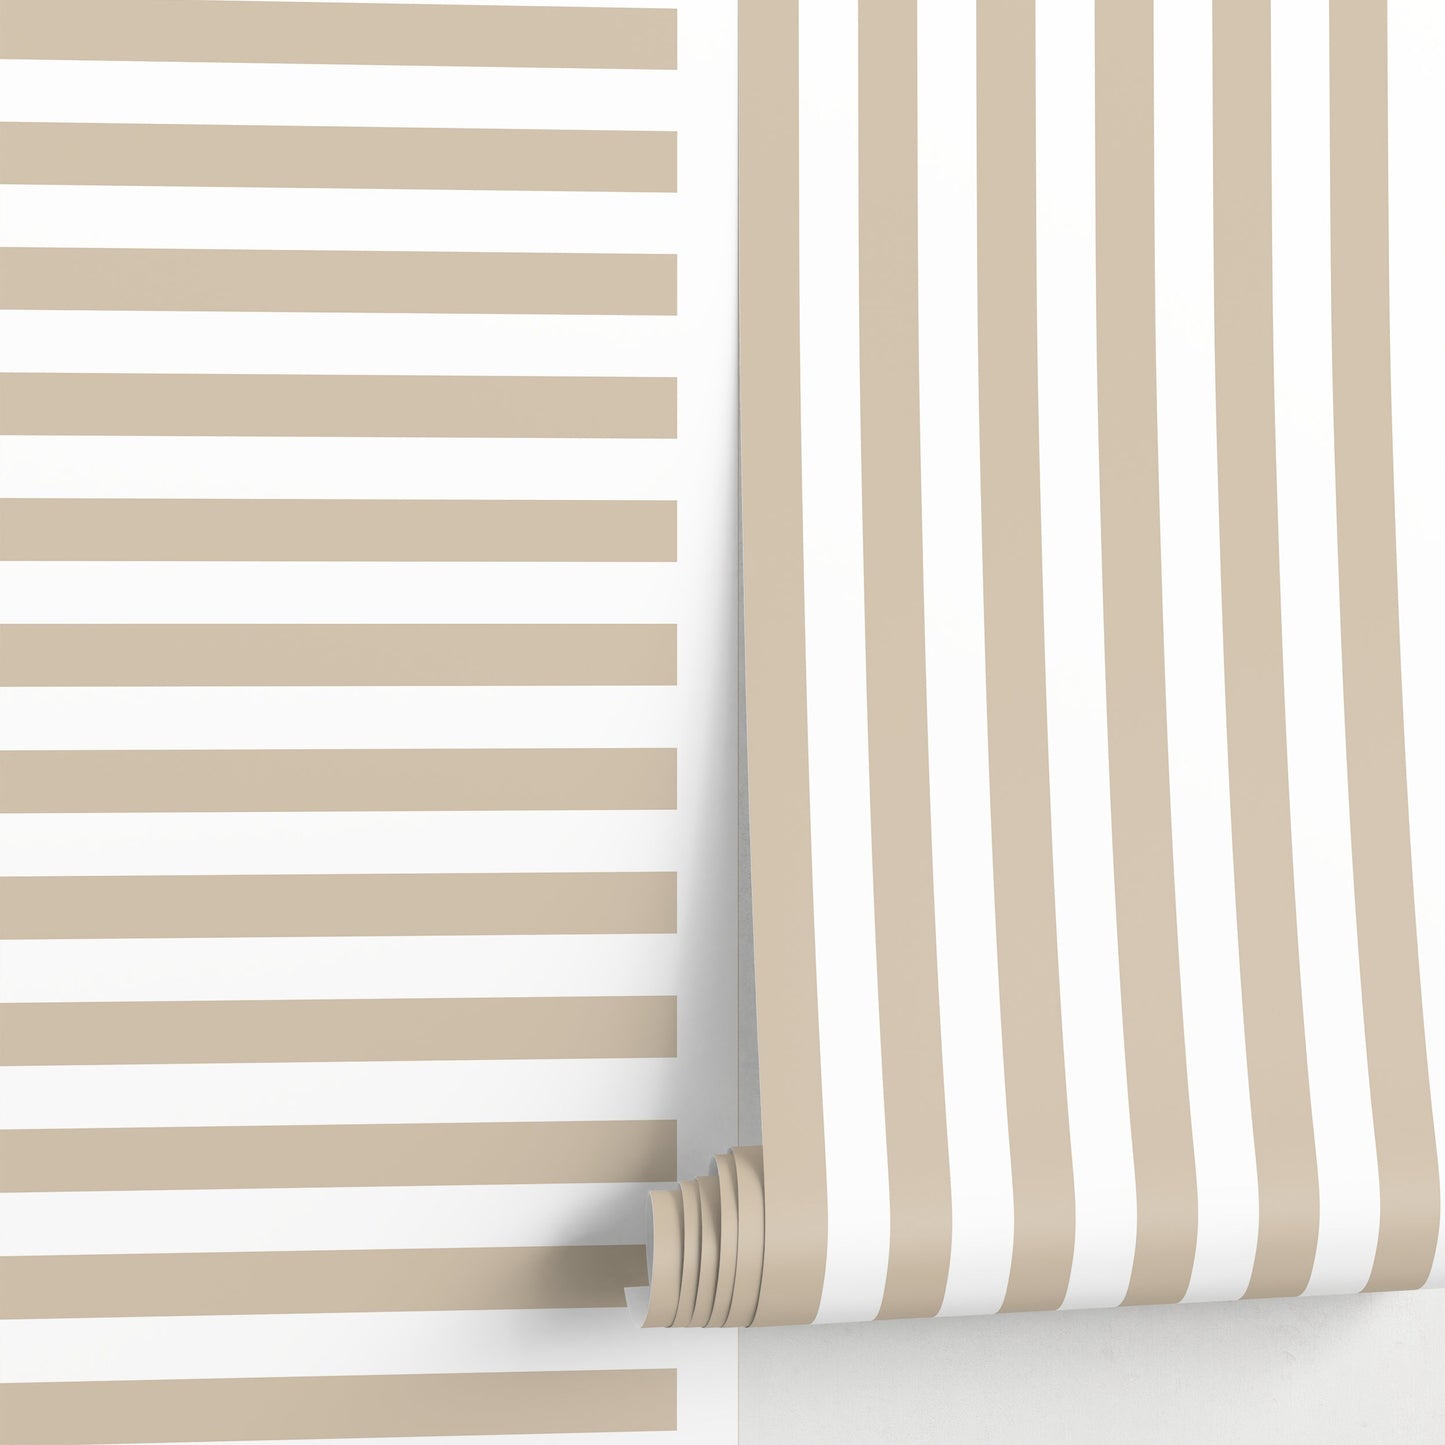 Beige Striped Wallpaper Modern Geometric Wallpaper Peel and Stick and Traditional Wallpaper - D736